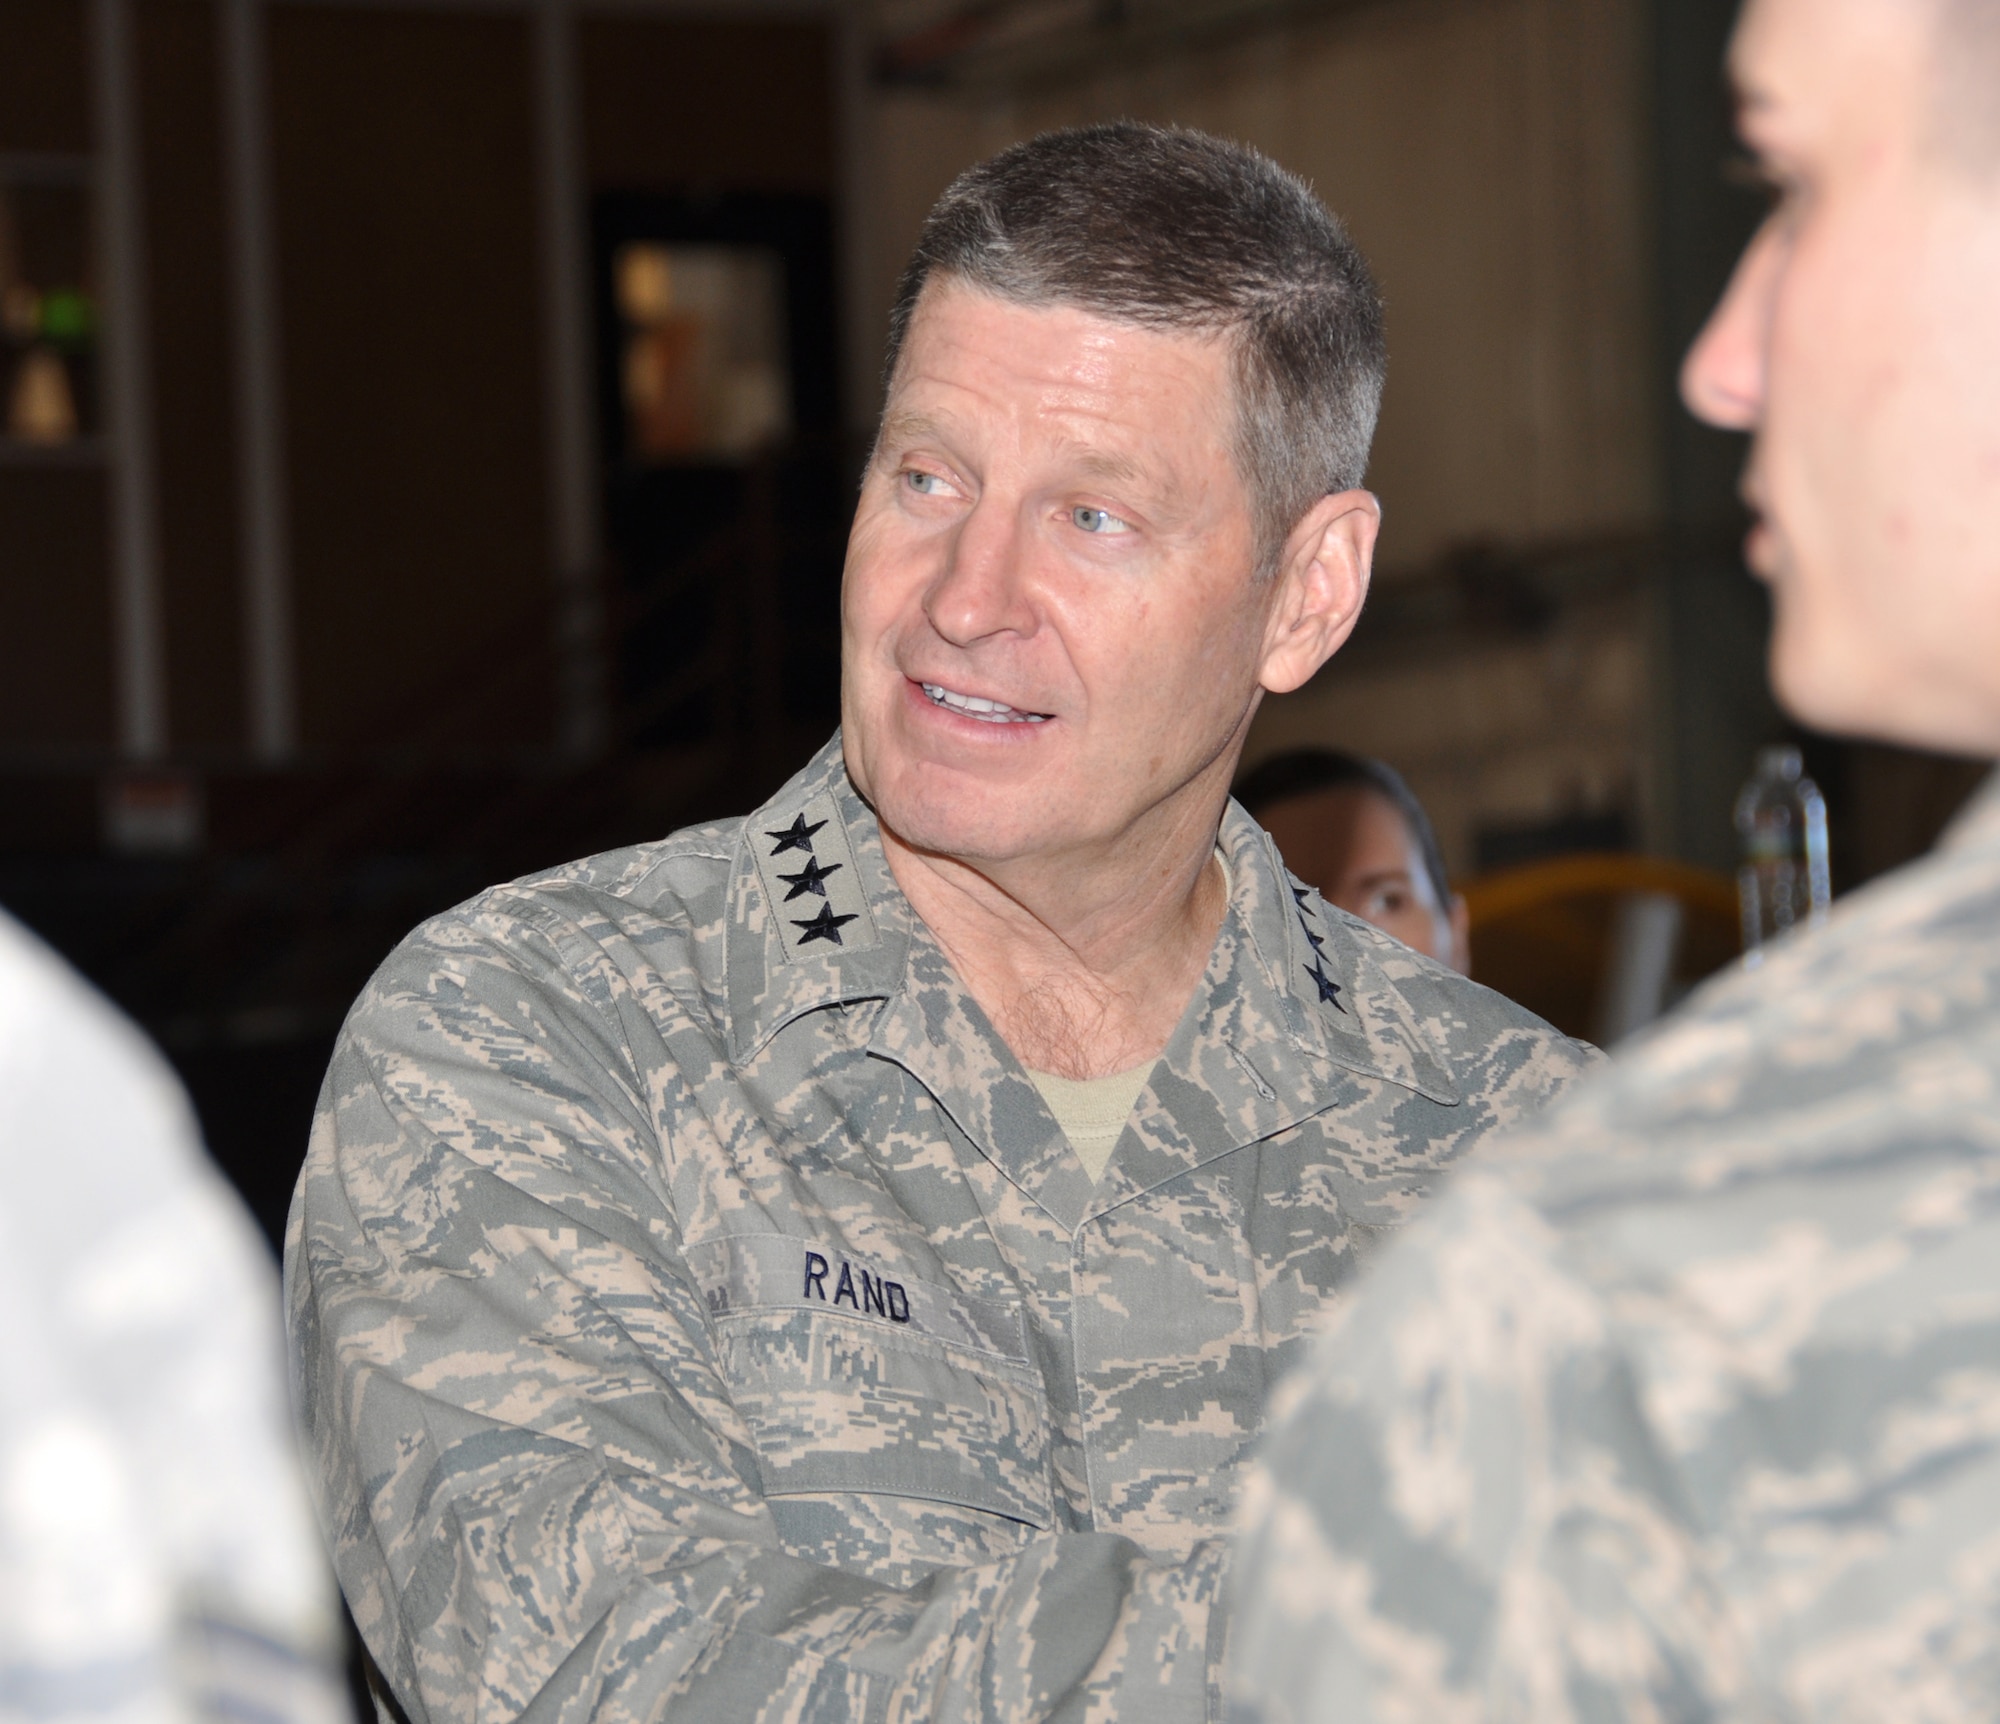 The 12th AF commander toured various areas of the 301st Fighter Wing visiting with Airmen and listening to their questions about the current state of affairs. Some Airmen recieved personal kudos from Lt Gen Rand for their superior performance.